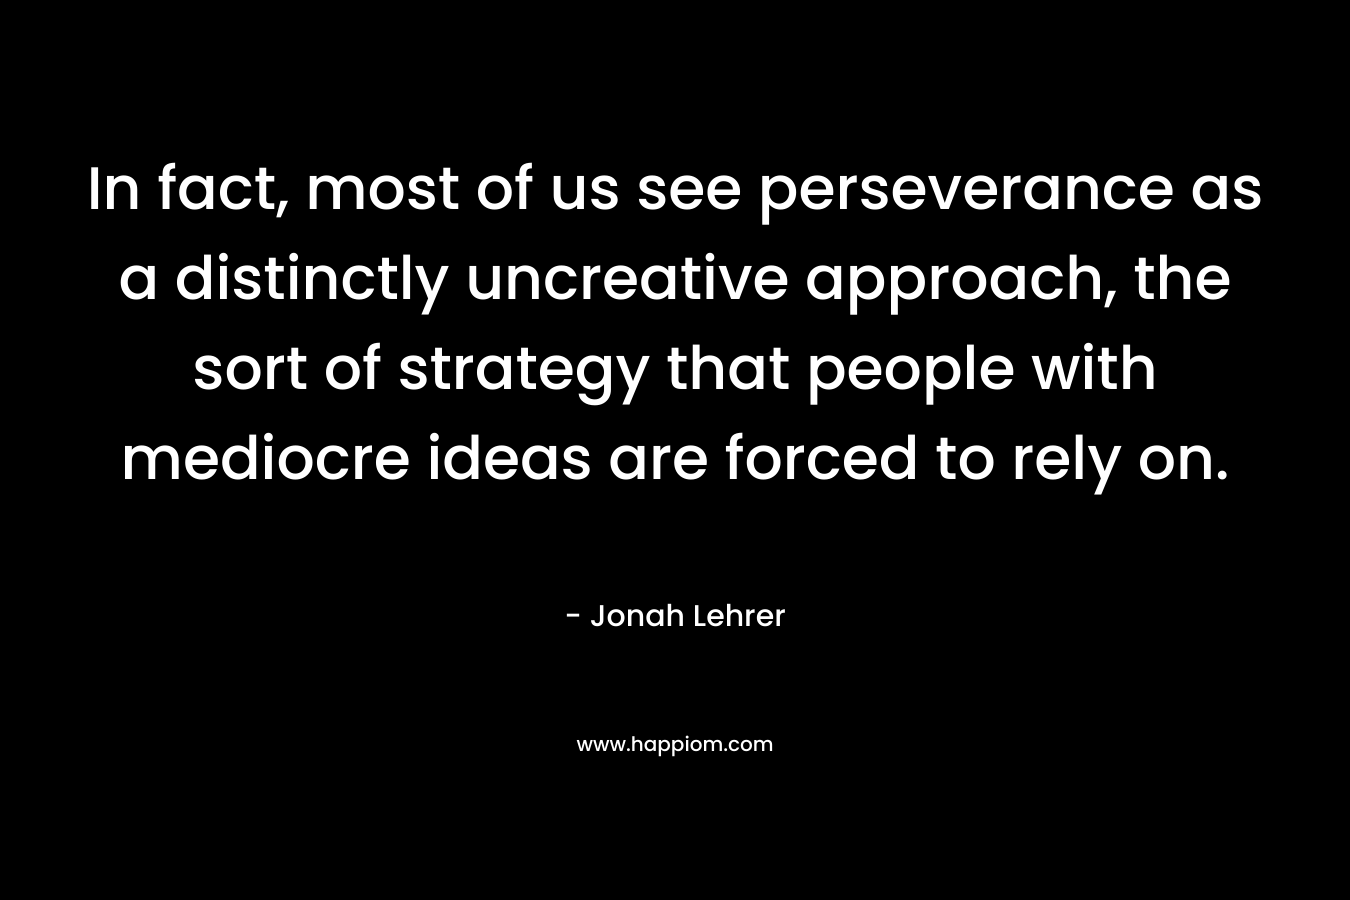 In fact, most of us see perseverance as a distinctly uncreative approach, the sort of strategy that people with mediocre ideas are forced to rely on. – Jonah Lehrer